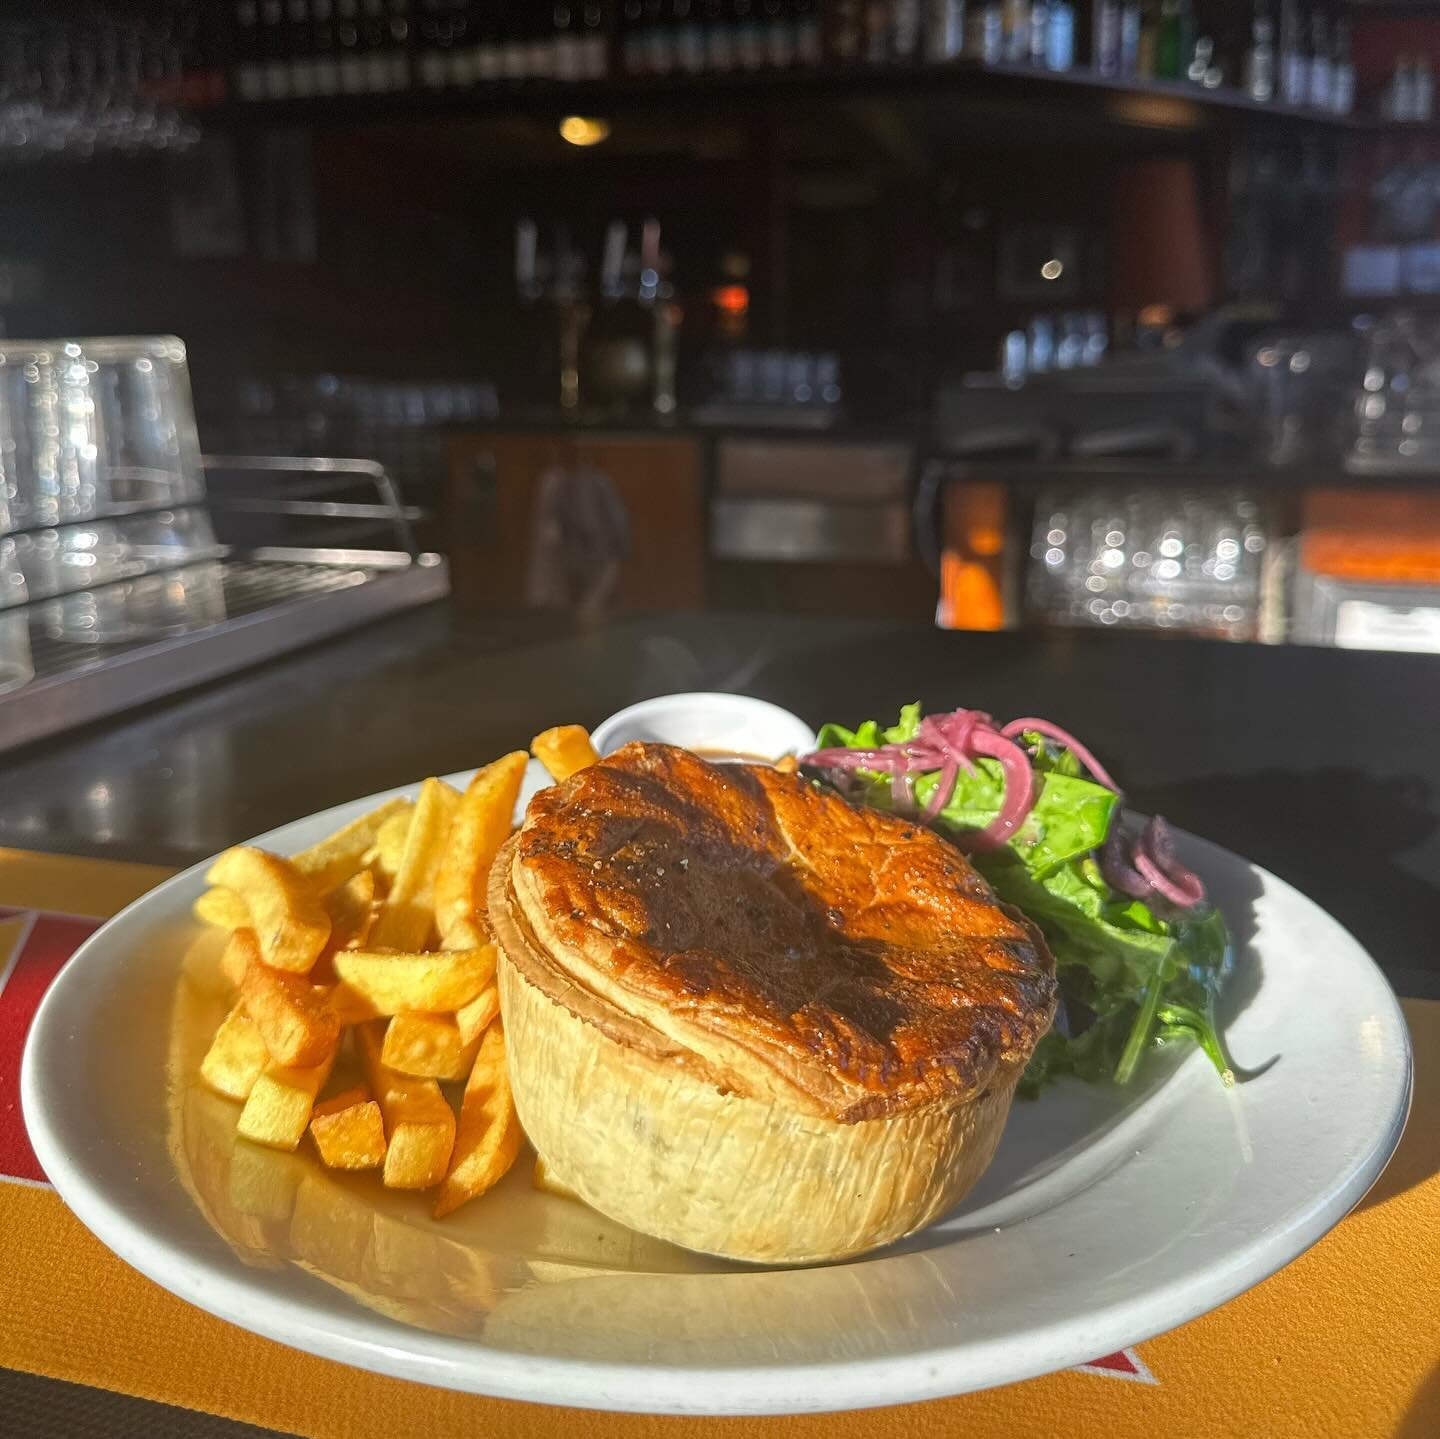 It&rsquo;s Parma night at our ranch. But our full menu is also always ready to go too. 

$19 for a parma or schnitzel. 
Full menu available also. 

Say less! x

.
.
.
.
.
.
.
.
.
.
.

#Fitzroy #Pub #Monday #Pie #PubGrub